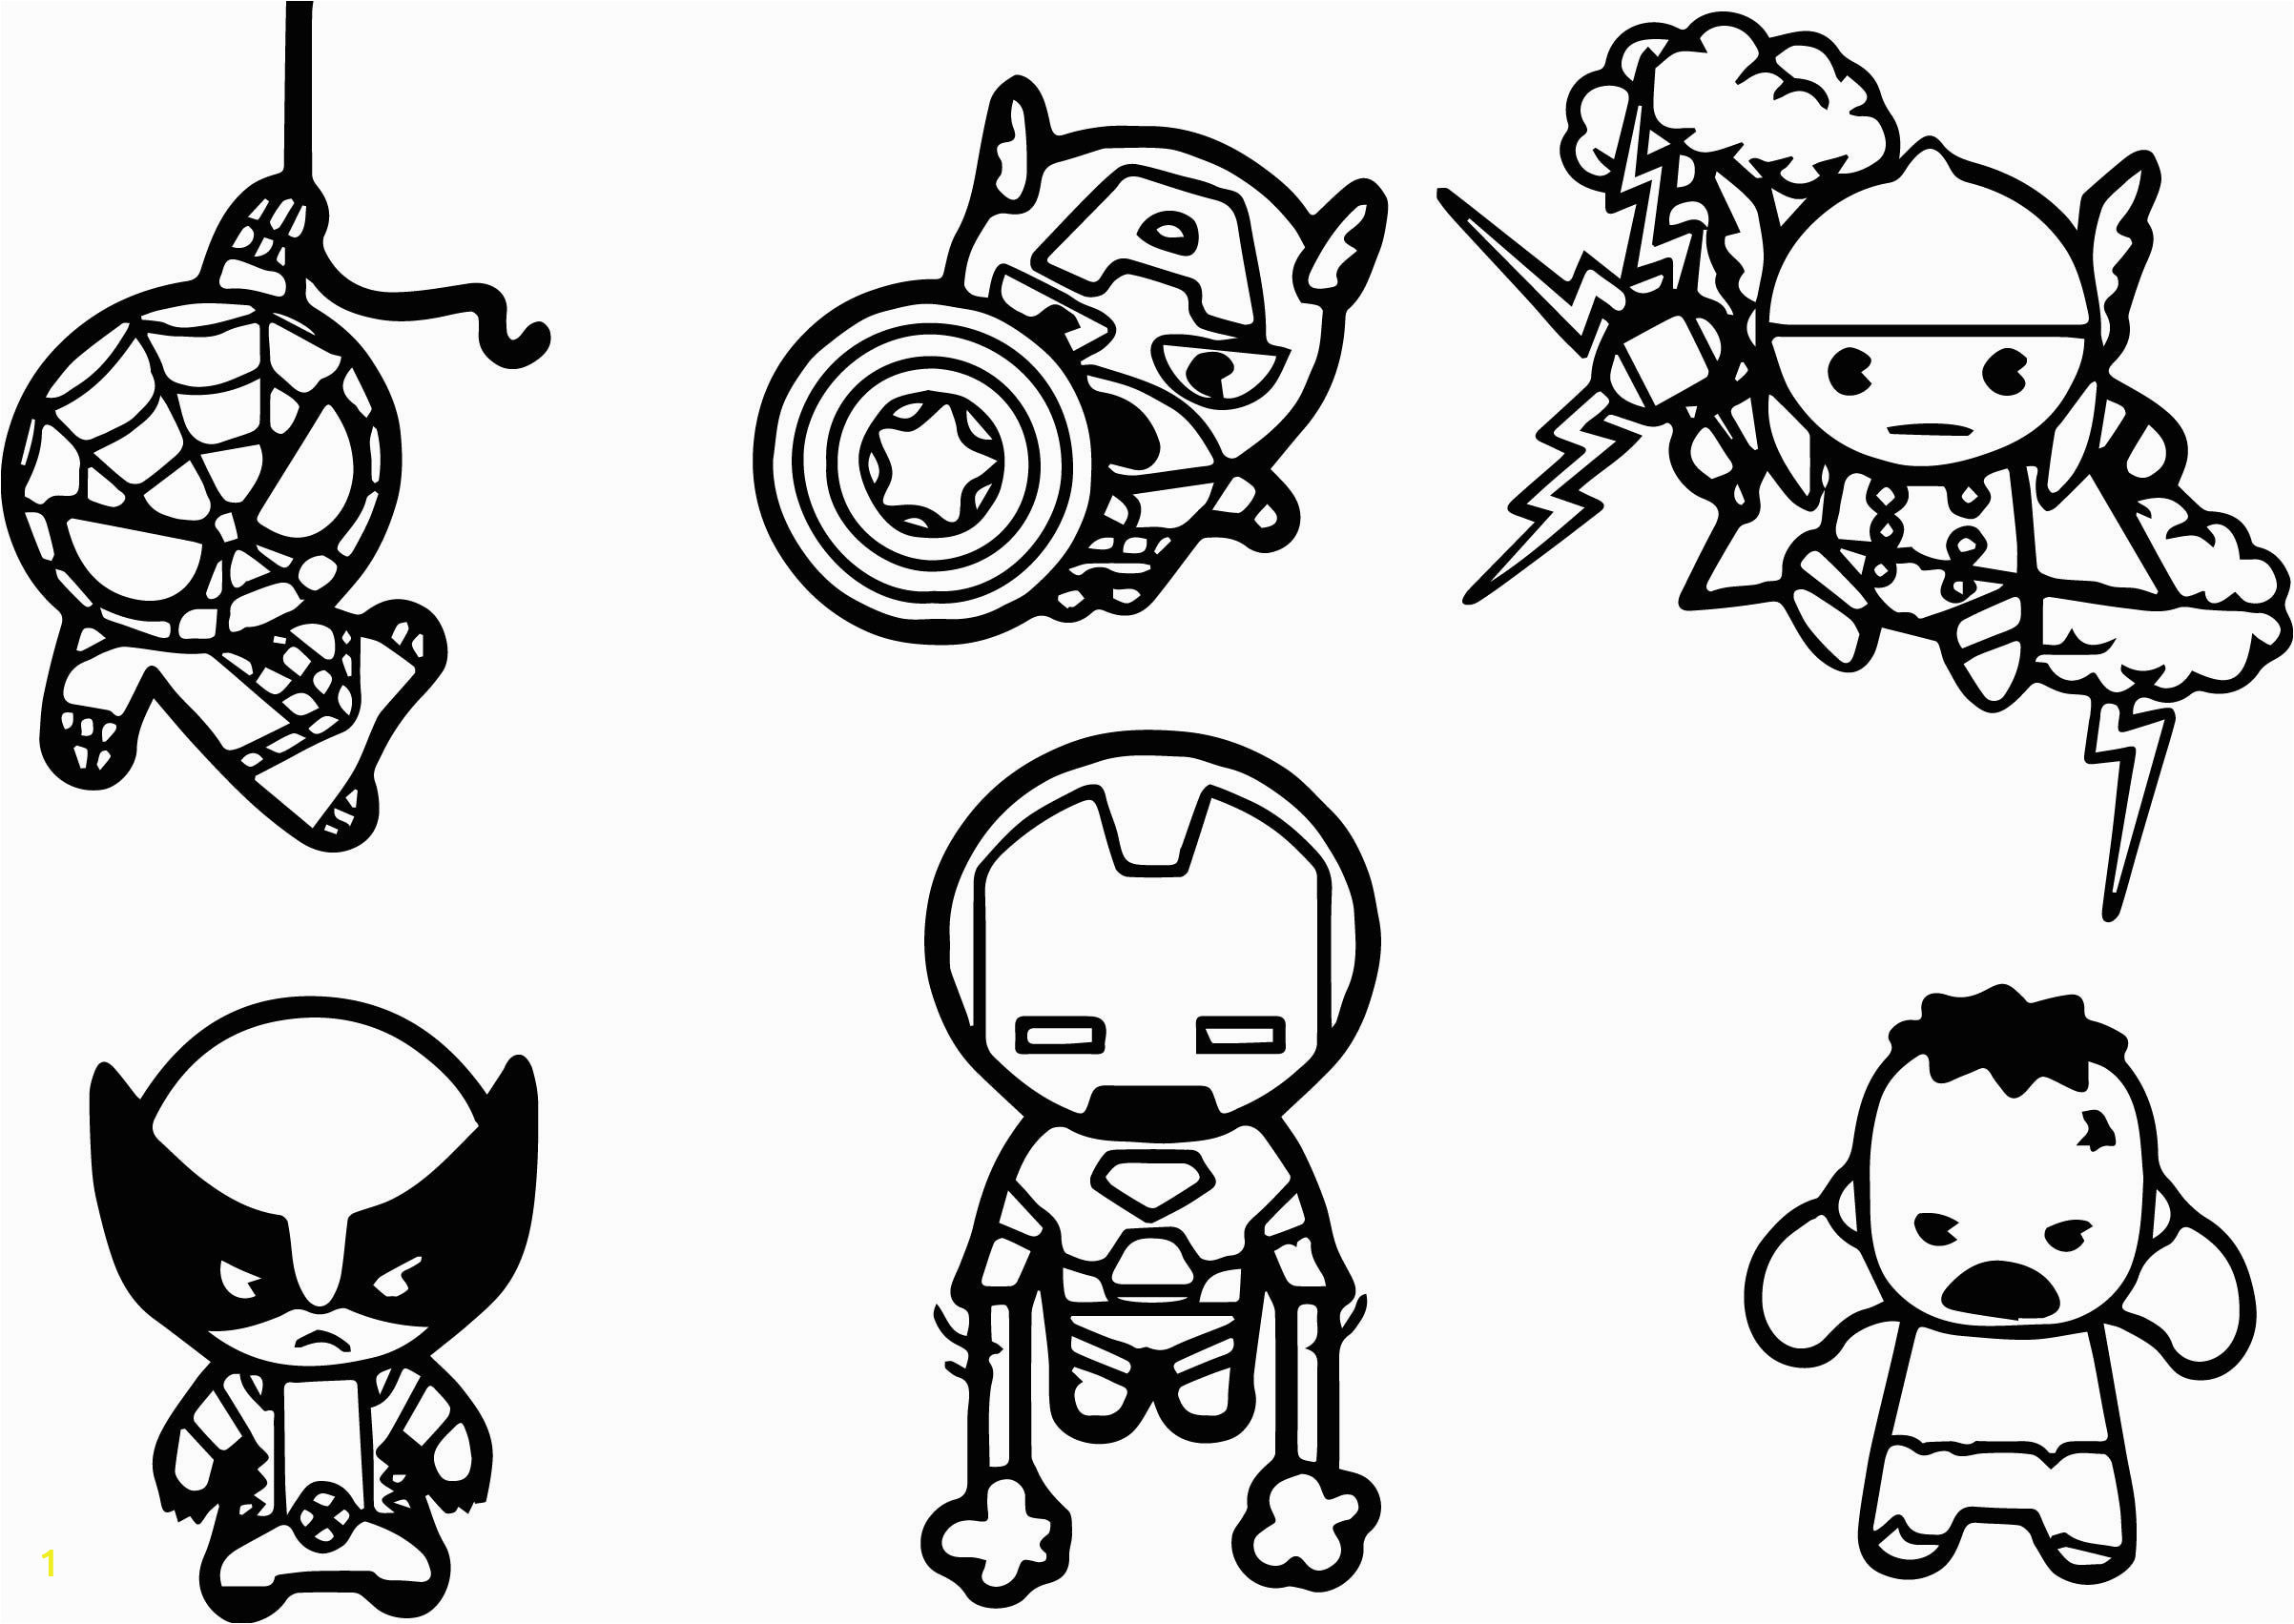 Marvel Super Hero Adventures Coloring Pages Avengers Baby Chibi Characters Coloring Page